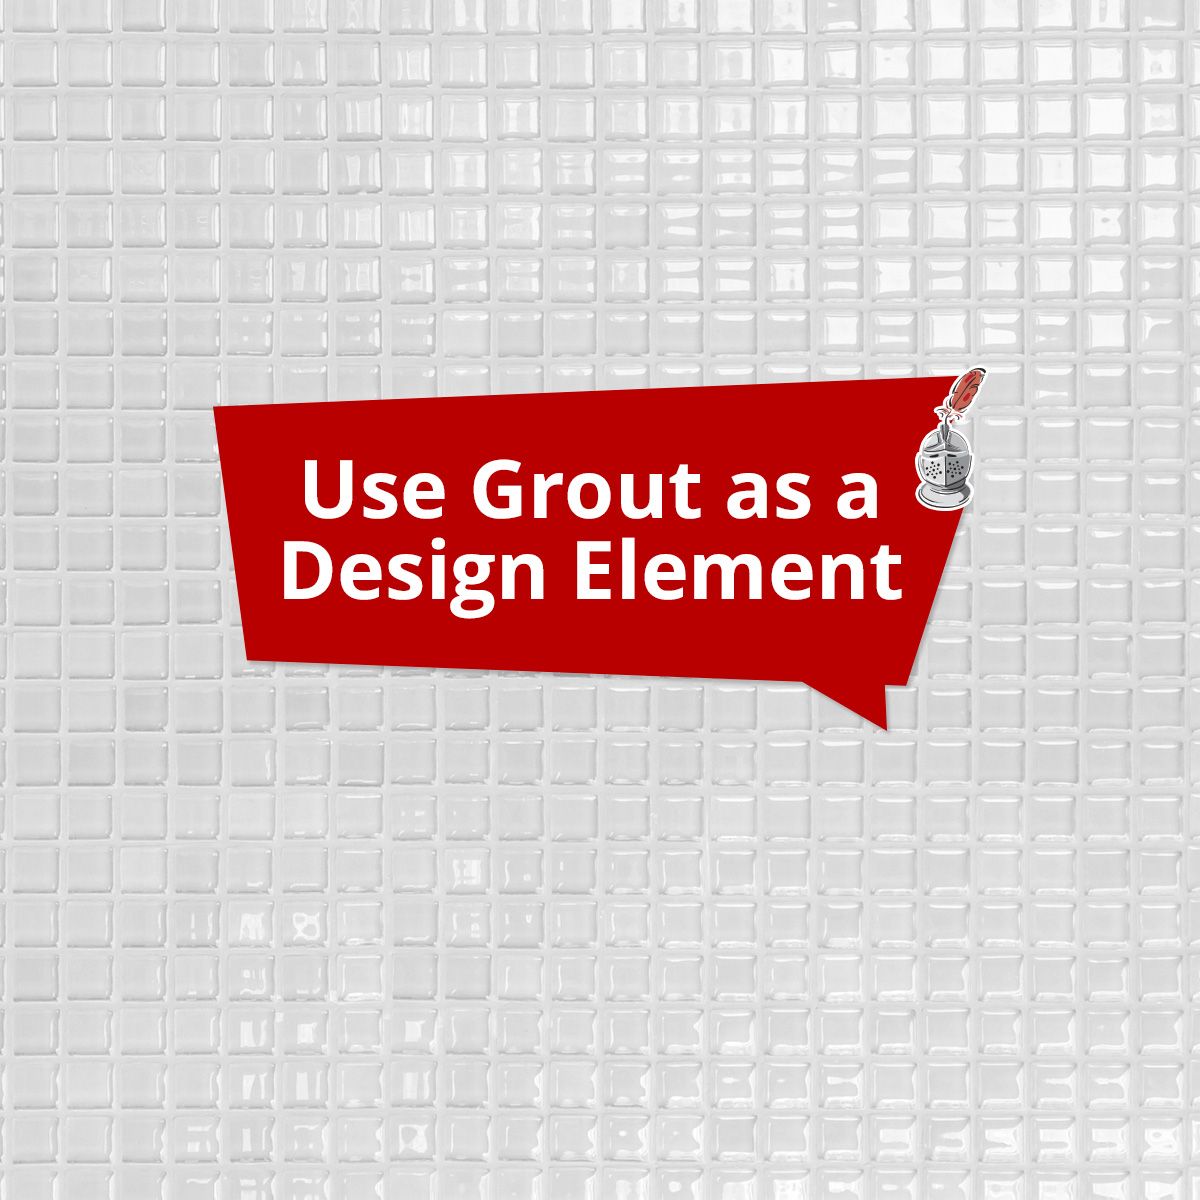 Use Grout as a Design Element